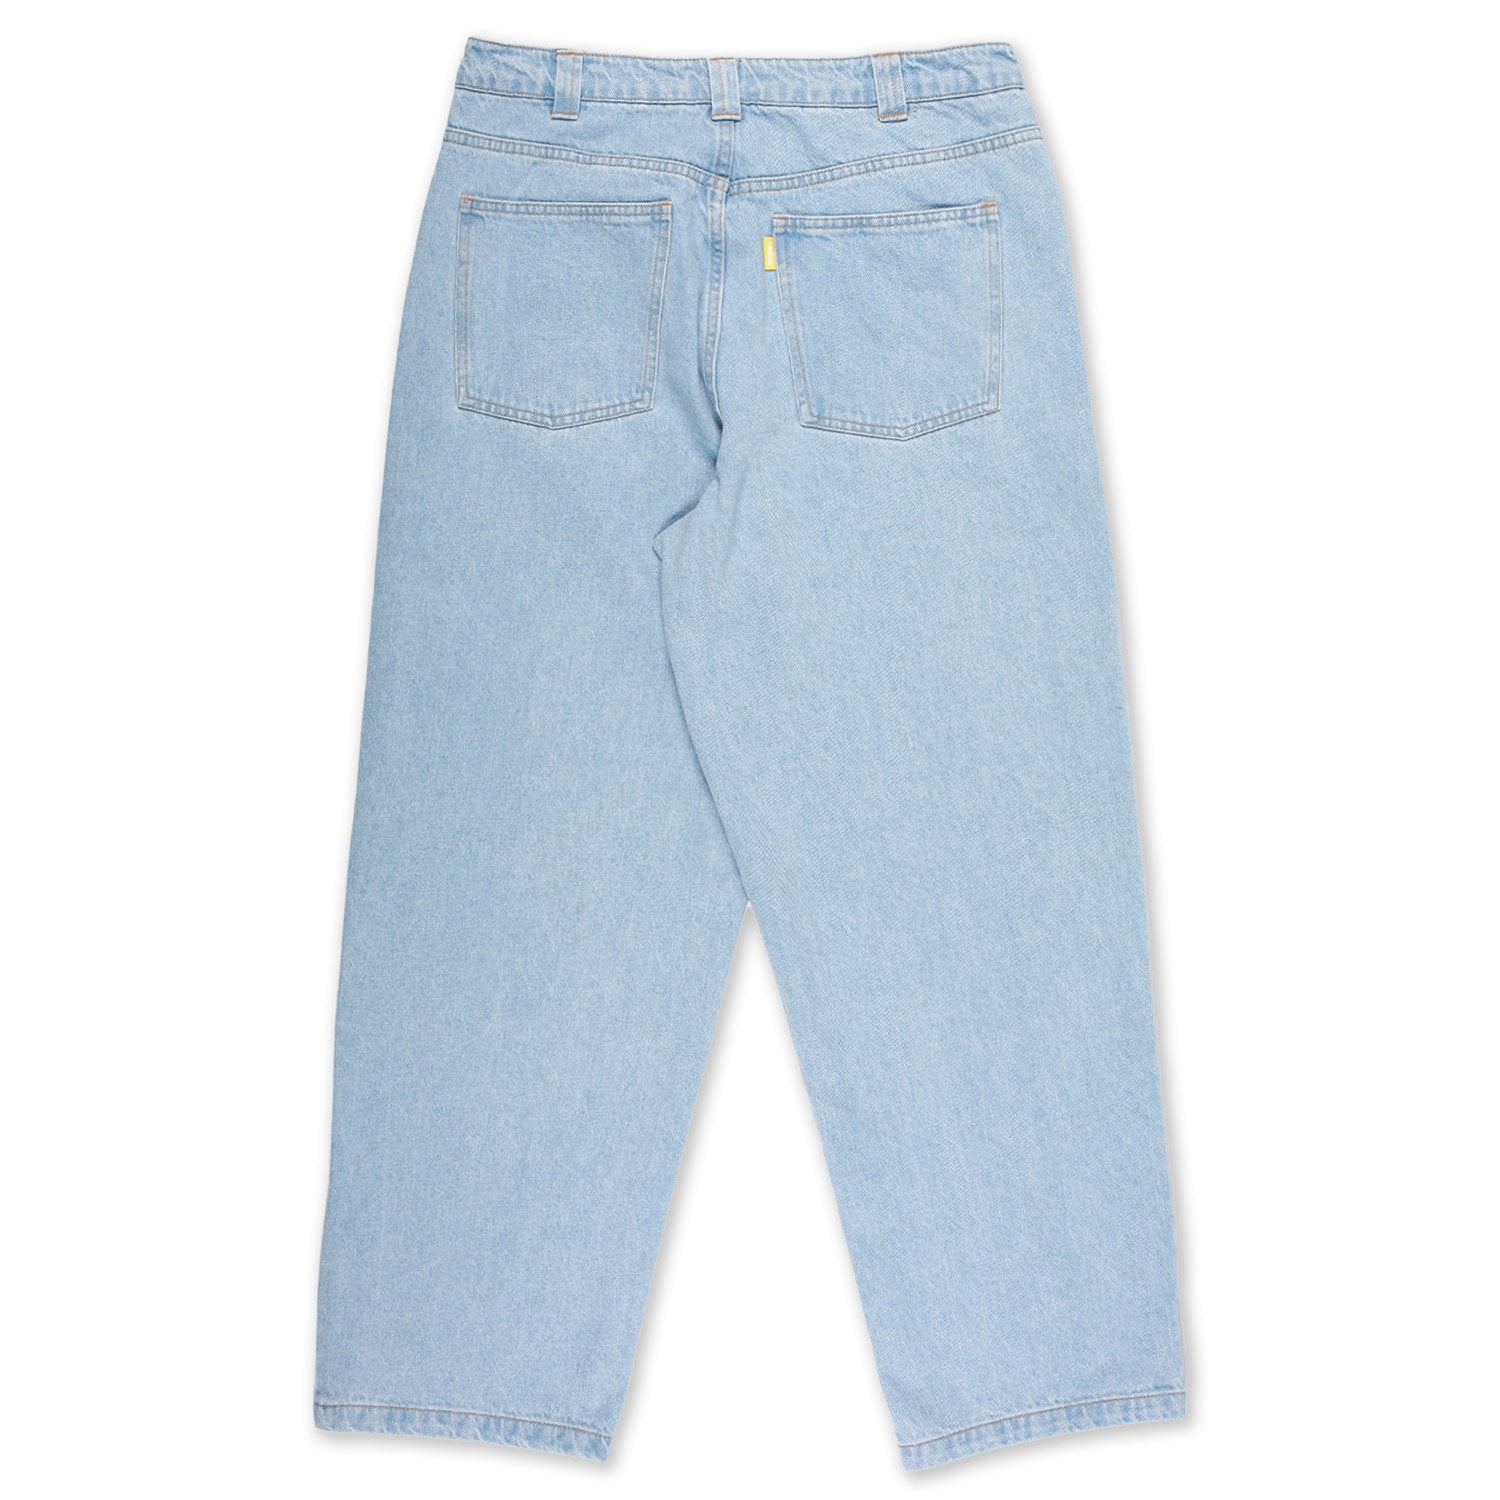 Theories Plaza Jeans Washed Light Blue Baggy Fit Back